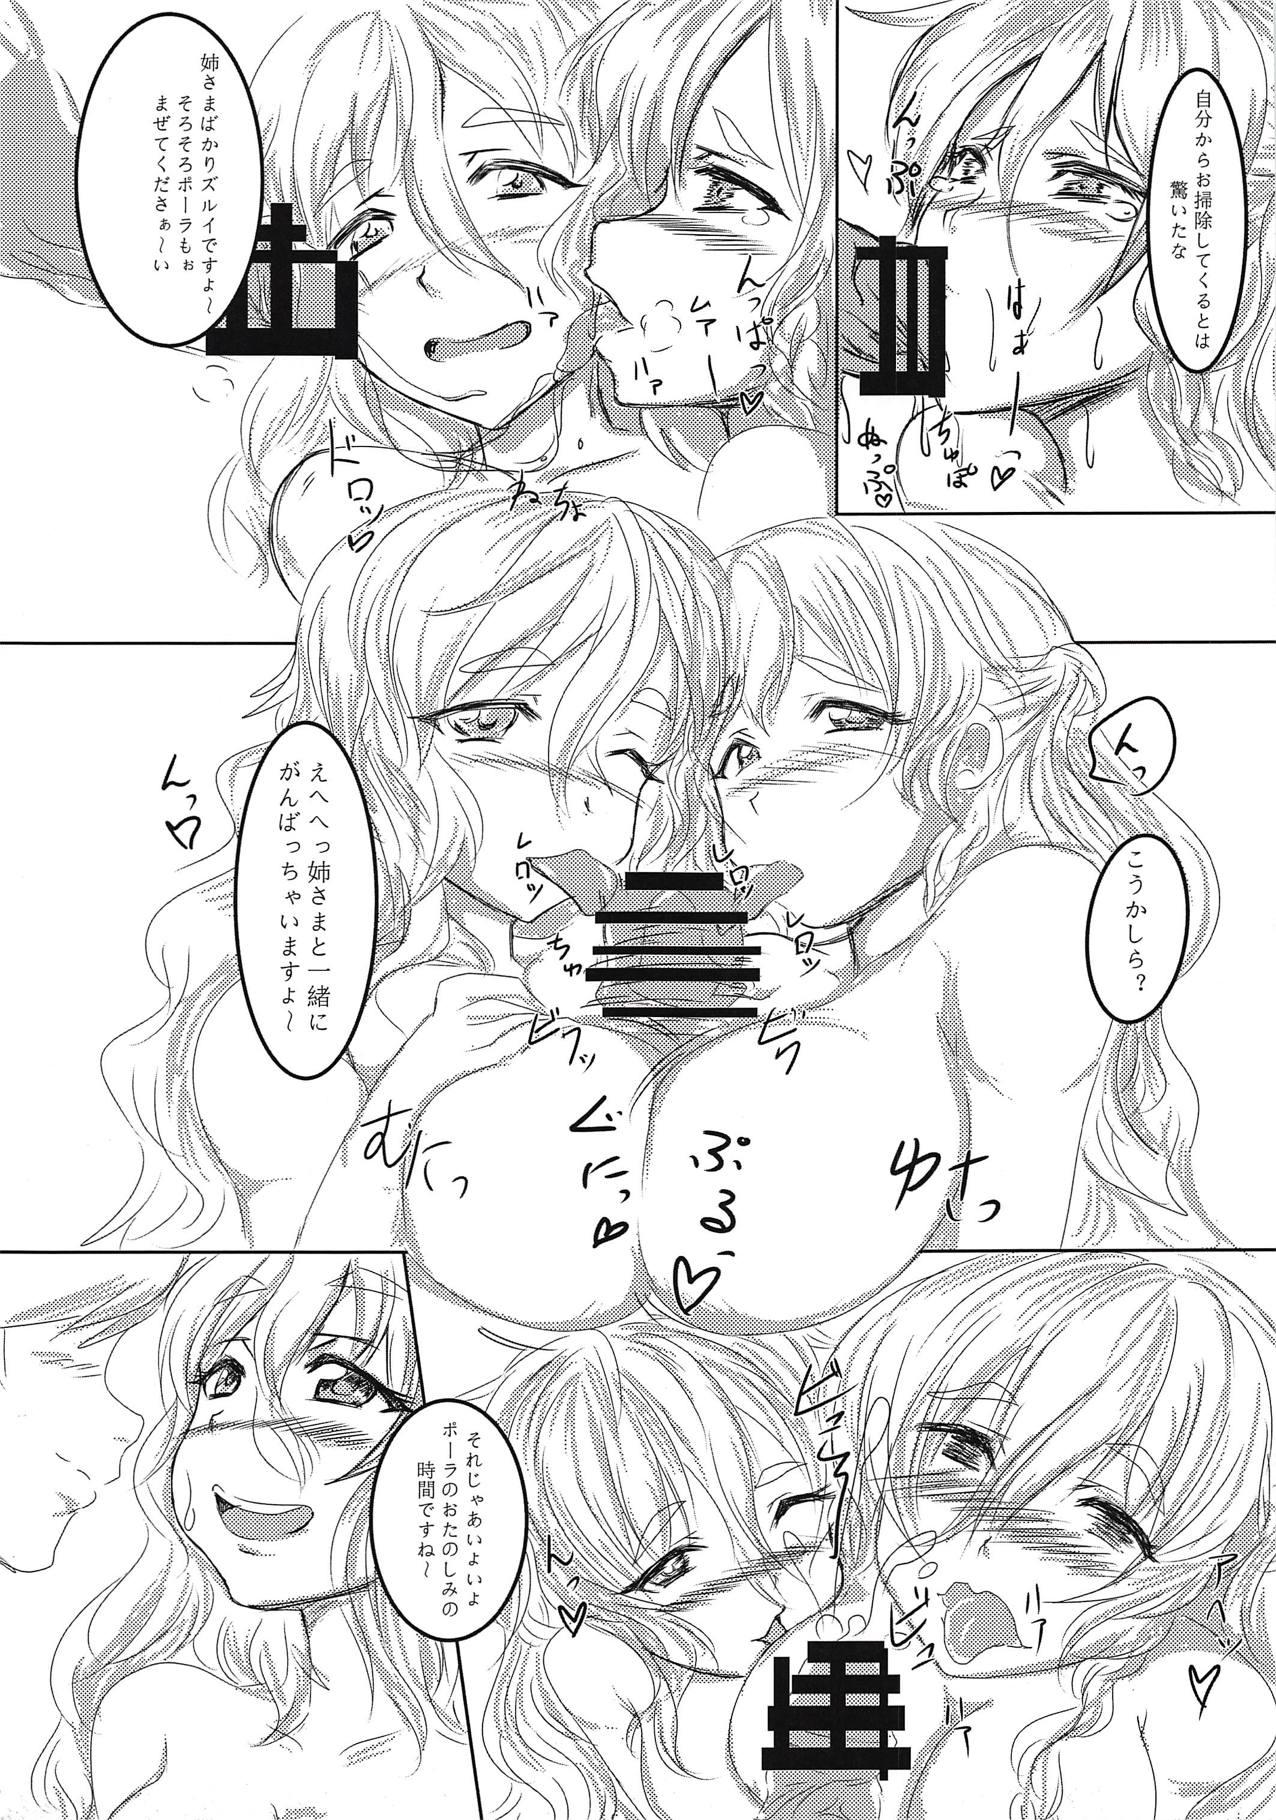 Shemale Porn ITACOM - Kantai collection Sapphic Erotica - Page 6